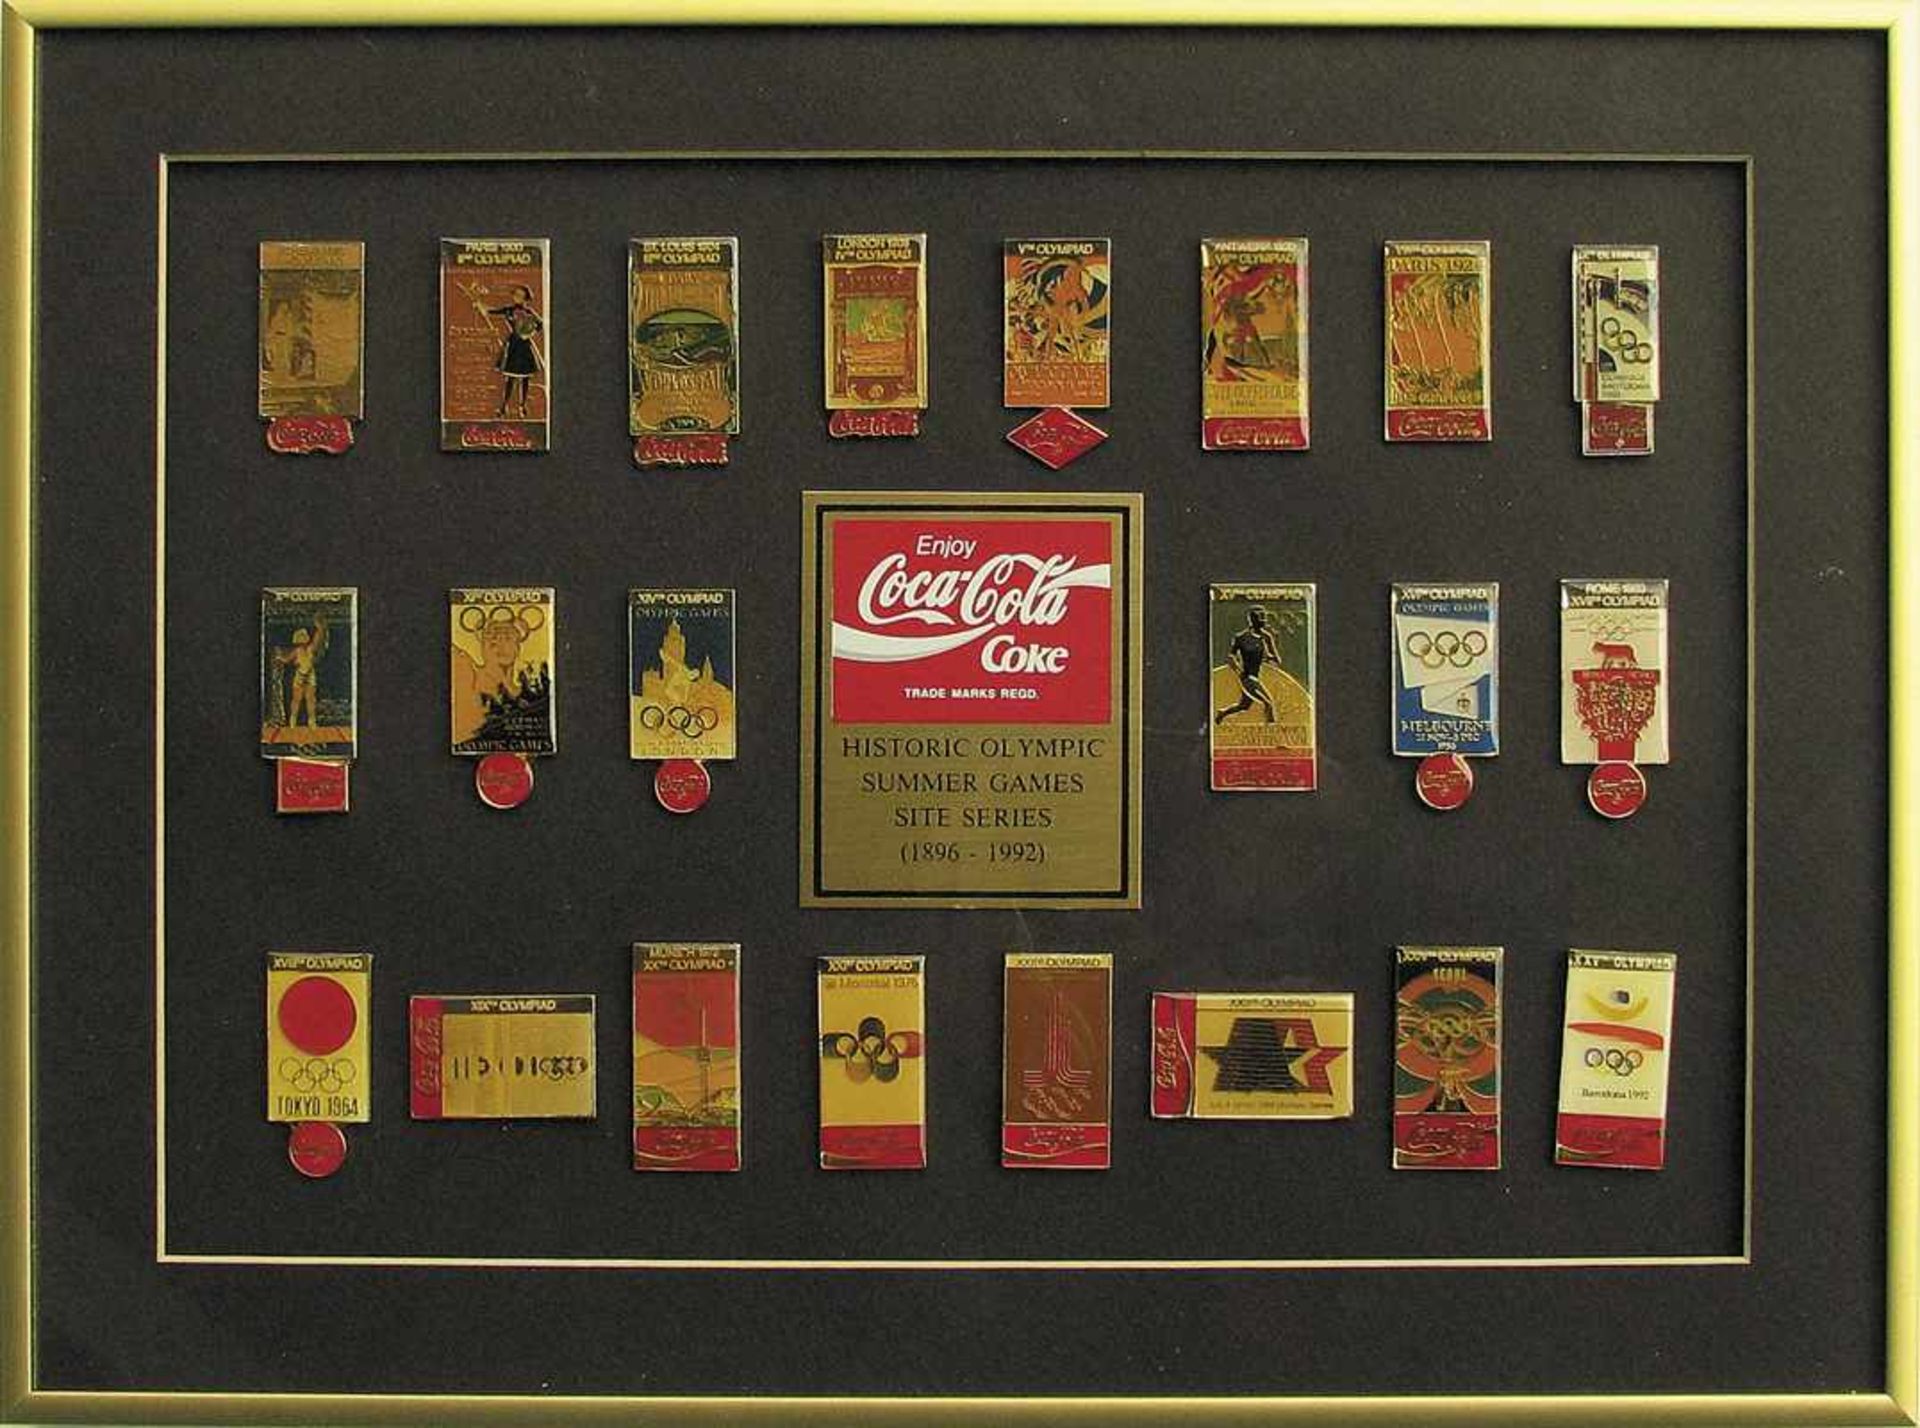 Olympic Games 1986 -1992 Pin Collection Coca Cola - Collection of 22 visitor pins of the Summer